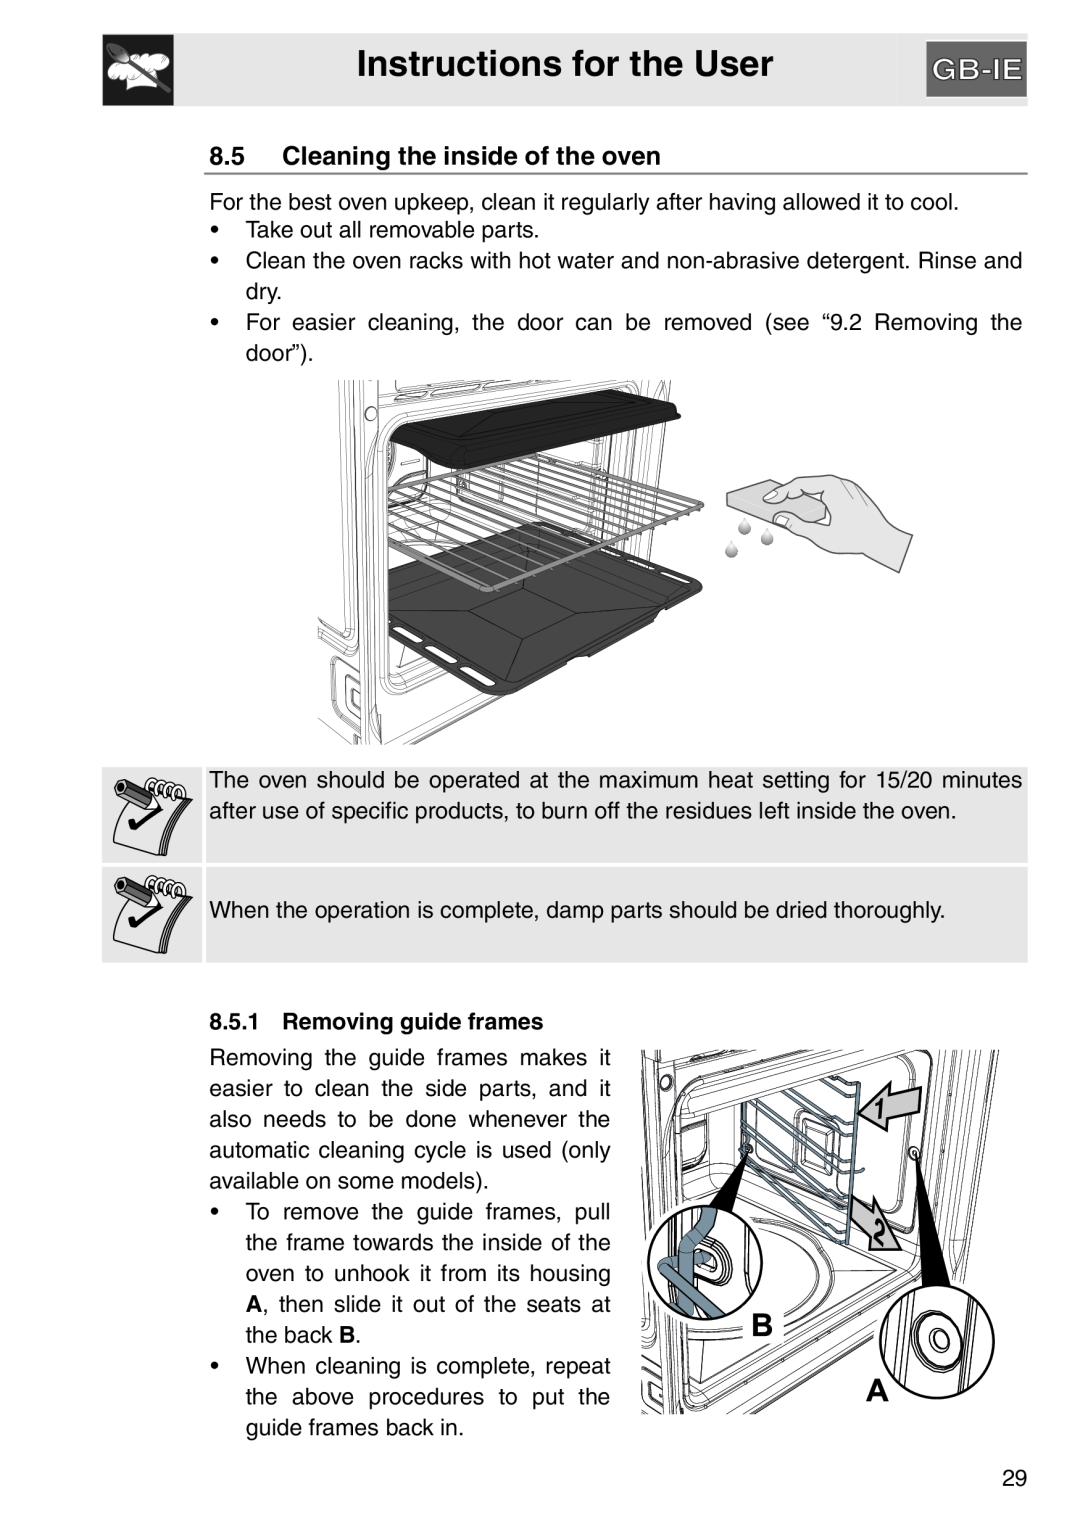 Smeg electric oven, SAP306X-9 Cleaning the inside of the oven, Instructions for the User, Removing guide frames 